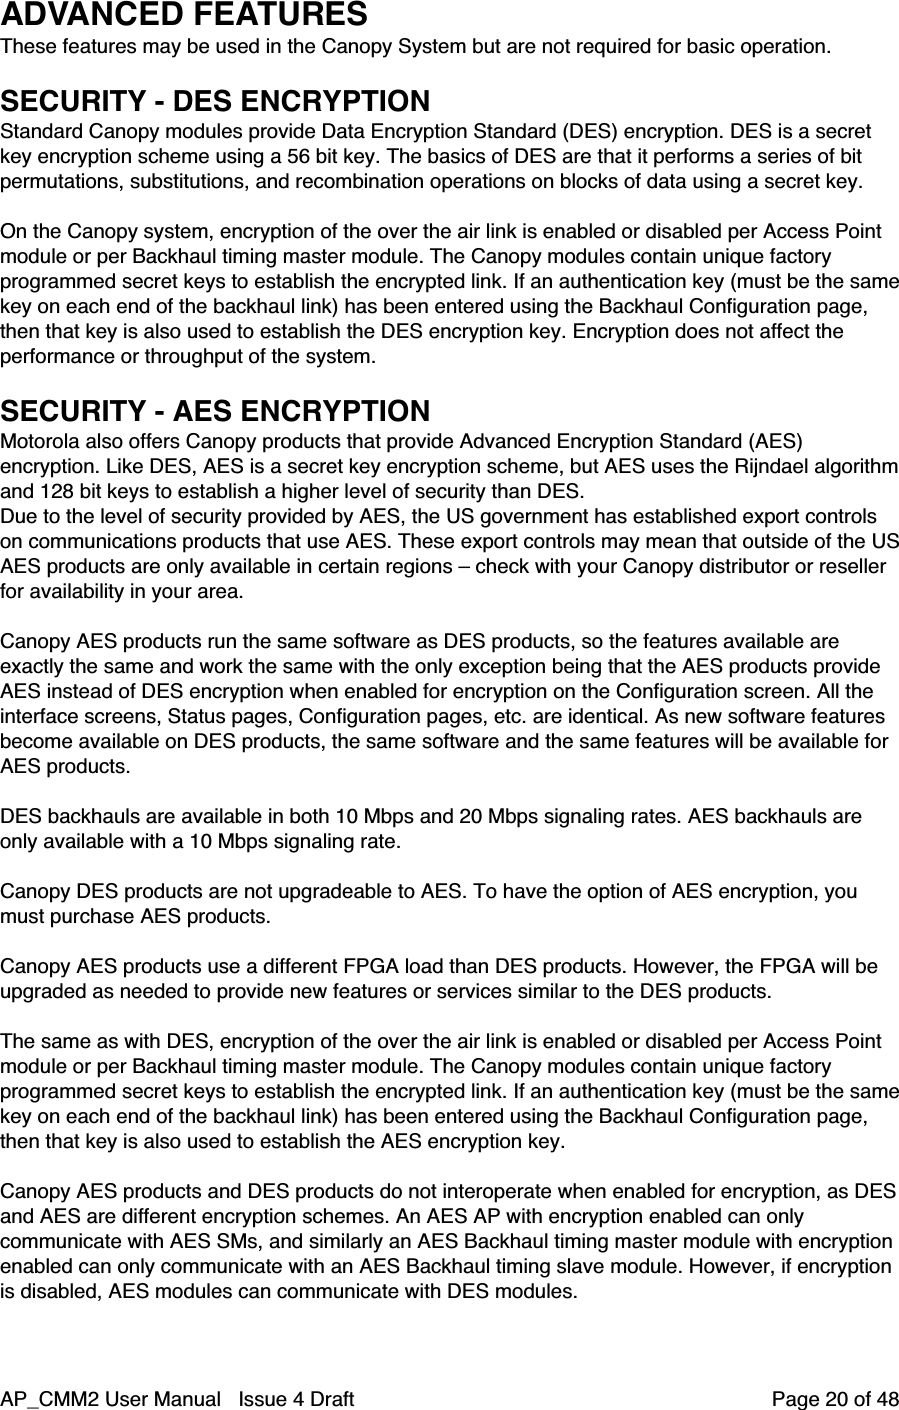 AP_CMM2 User Manual   Issue 4 Draft         Page 20 of 48ADVANCED FEATURESThese features may be used in the Canopy System but are not required for basic operation.SECURITY - DES ENCRYPTIONStandard Canopy modules provide Data Encryption Standard (DES) encryption. DES is a secretkey encryption scheme using a 56 bit key. The basics of DES are that it performs a series of bitpermutations, substitutions, and recombination operations on blocks of data using a secret key.On the Canopy system, encryption of the over the air link is enabled or disabled per Access Pointmodule or per Backhaul timing master module. The Canopy modules contain unique factoryprogrammed secret keys to establish the encrypted link. If an authentication key (must be the samekey on each end of the backhaul link) has been entered using the Backhaul Configuration page,then that key is also used to establish the DES encryption key. Encryption does not affect theperformance or throughput of the system.SECURITY - AES ENCRYPTIONMotorola also offers Canopy products that provide Advanced Encryption Standard (AES)encryption. Like DES, AES is a secret key encryption scheme, but AES uses the Rijndael algorithmand 128 bit keys to establish a higher level of security than DES.Due to the level of security provided by AES, the US government has established export controlson communications products that use AES. These export controls may mean that outside of the USAES products are only available in certain regions – check with your Canopy distributor or resellerfor availability in your area.Canopy AES products run the same software as DES products, so the features available areexactly the same and work the same with the only exception being that the AES products provideAES instead of DES encryption when enabled for encryption on the Configuration screen. All theinterface screens, Status pages, Configuration pages, etc. are identical. As new software featuresbecome available on DES products, the same software and the same features will be available forAES products.DES backhauls are available in both 10 Mbps and 20 Mbps signaling rates. AES backhauls areonly available with a 10 Mbps signaling rate.Canopy DES products are not upgradeable to AES. To have the option of AES encryption, youmust purchase AES products.Canopy AES products use a different FPGA load than DES products. However, the FPGA will beupgraded as needed to provide new features or services similar to the DES products.The same as with DES, encryption of the over the air link is enabled or disabled per Access Pointmodule or per Backhaul timing master module. The Canopy modules contain unique factoryprogrammed secret keys to establish the encrypted link. If an authentication key (must be the samekey on each end of the backhaul link) has been entered using the Backhaul Configuration page,then that key is also used to establish the AES encryption key.Canopy AES products and DES products do not interoperate when enabled for encryption, as DESand AES are different encryption schemes. An AES AP with encryption enabled can onlycommunicate with AES SMs, and similarly an AES Backhaul timing master module with encryptionenabled can only communicate with an AES Backhaul timing slave module. However, if encryptionis disabled, AES modules can communicate with DES modules.